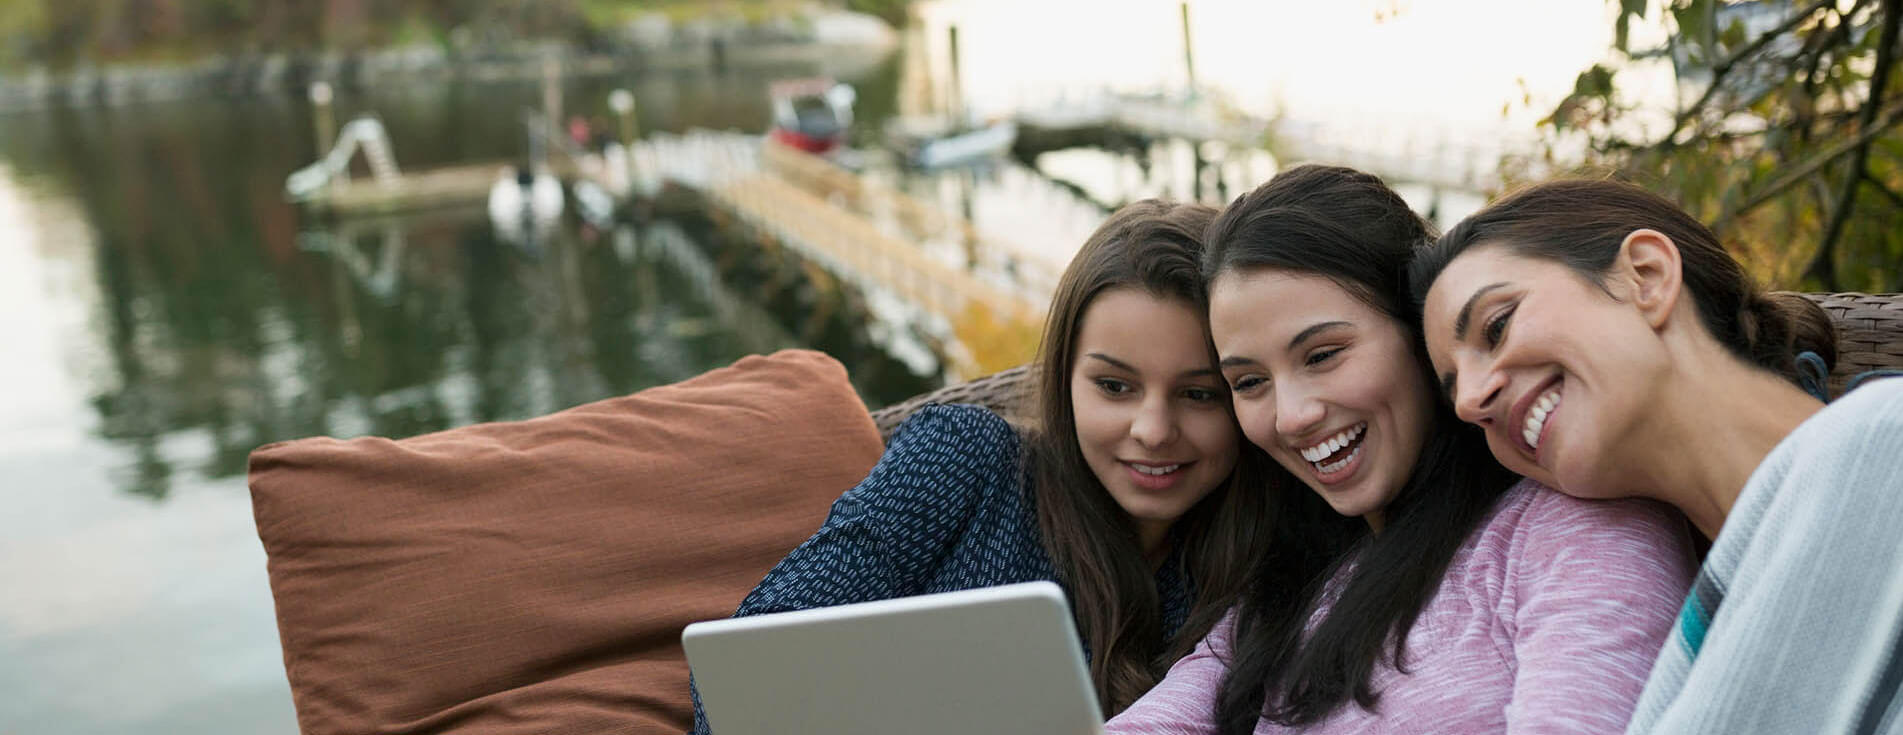 Young women video chatting by a lake.